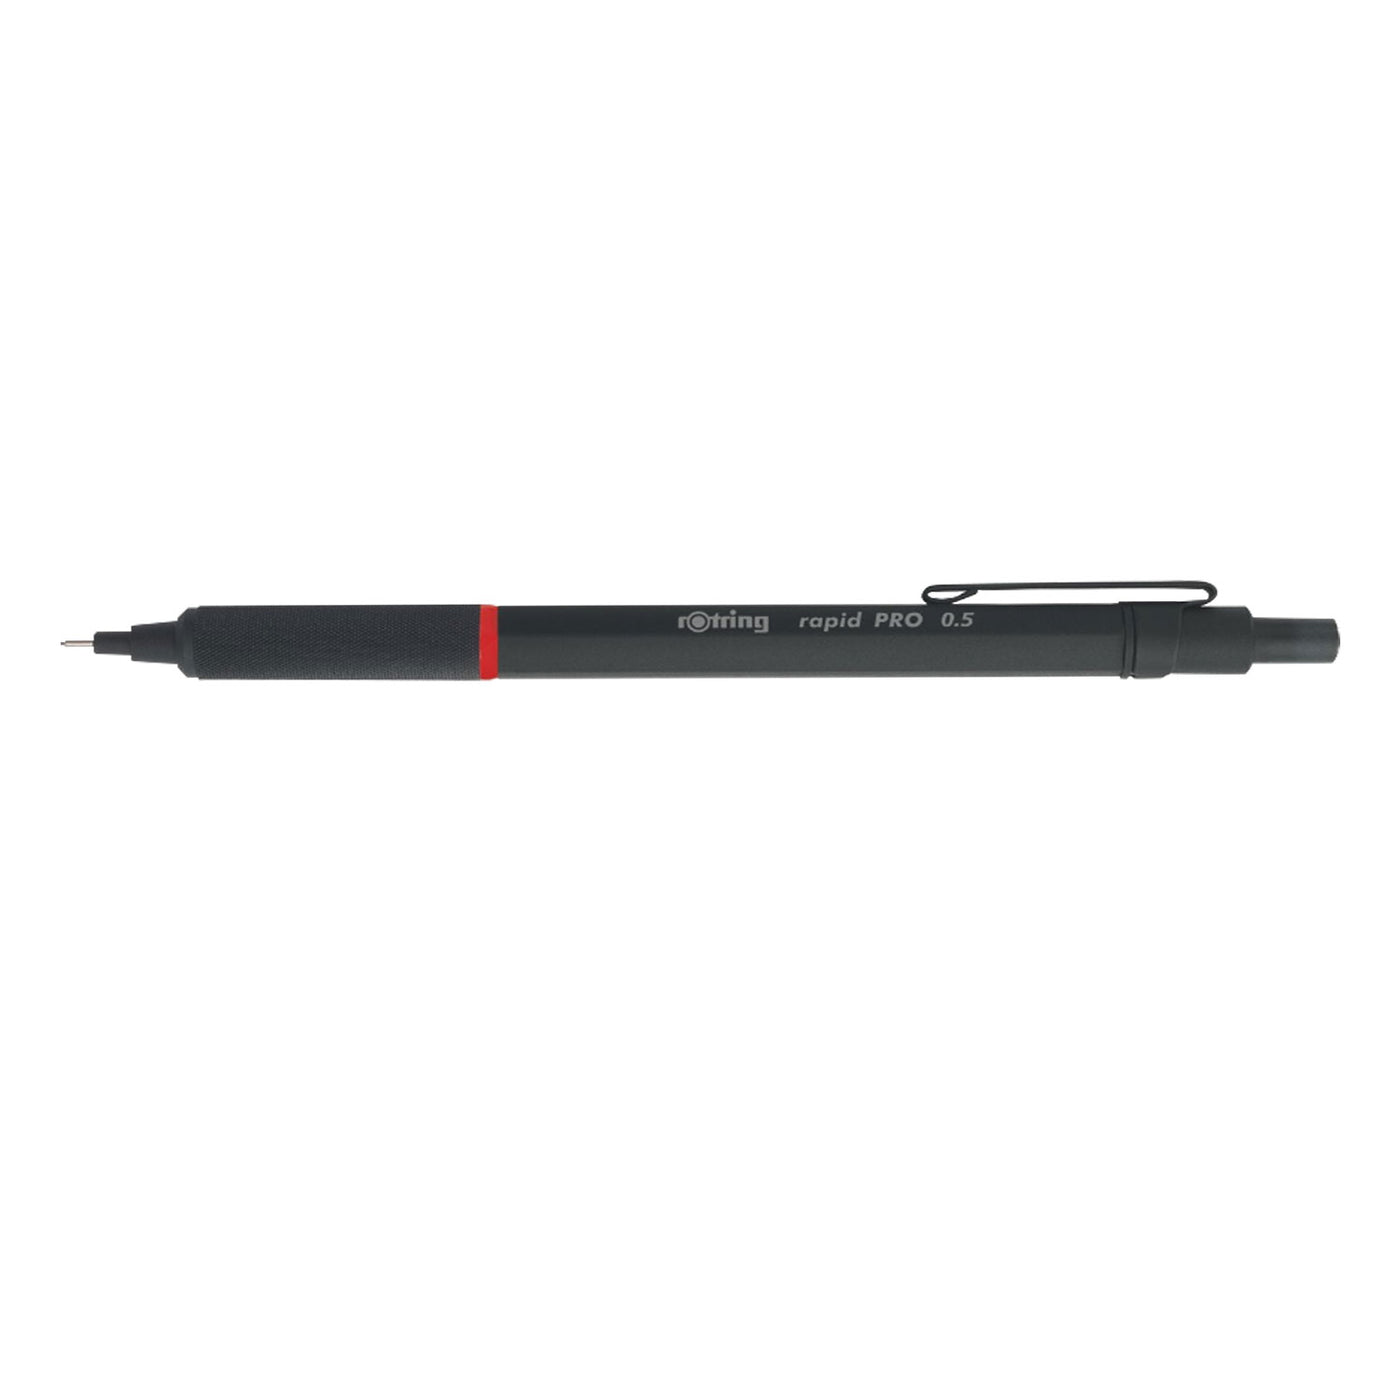 Rotring Rapid Pro 0.5mm Mechanical Pencil